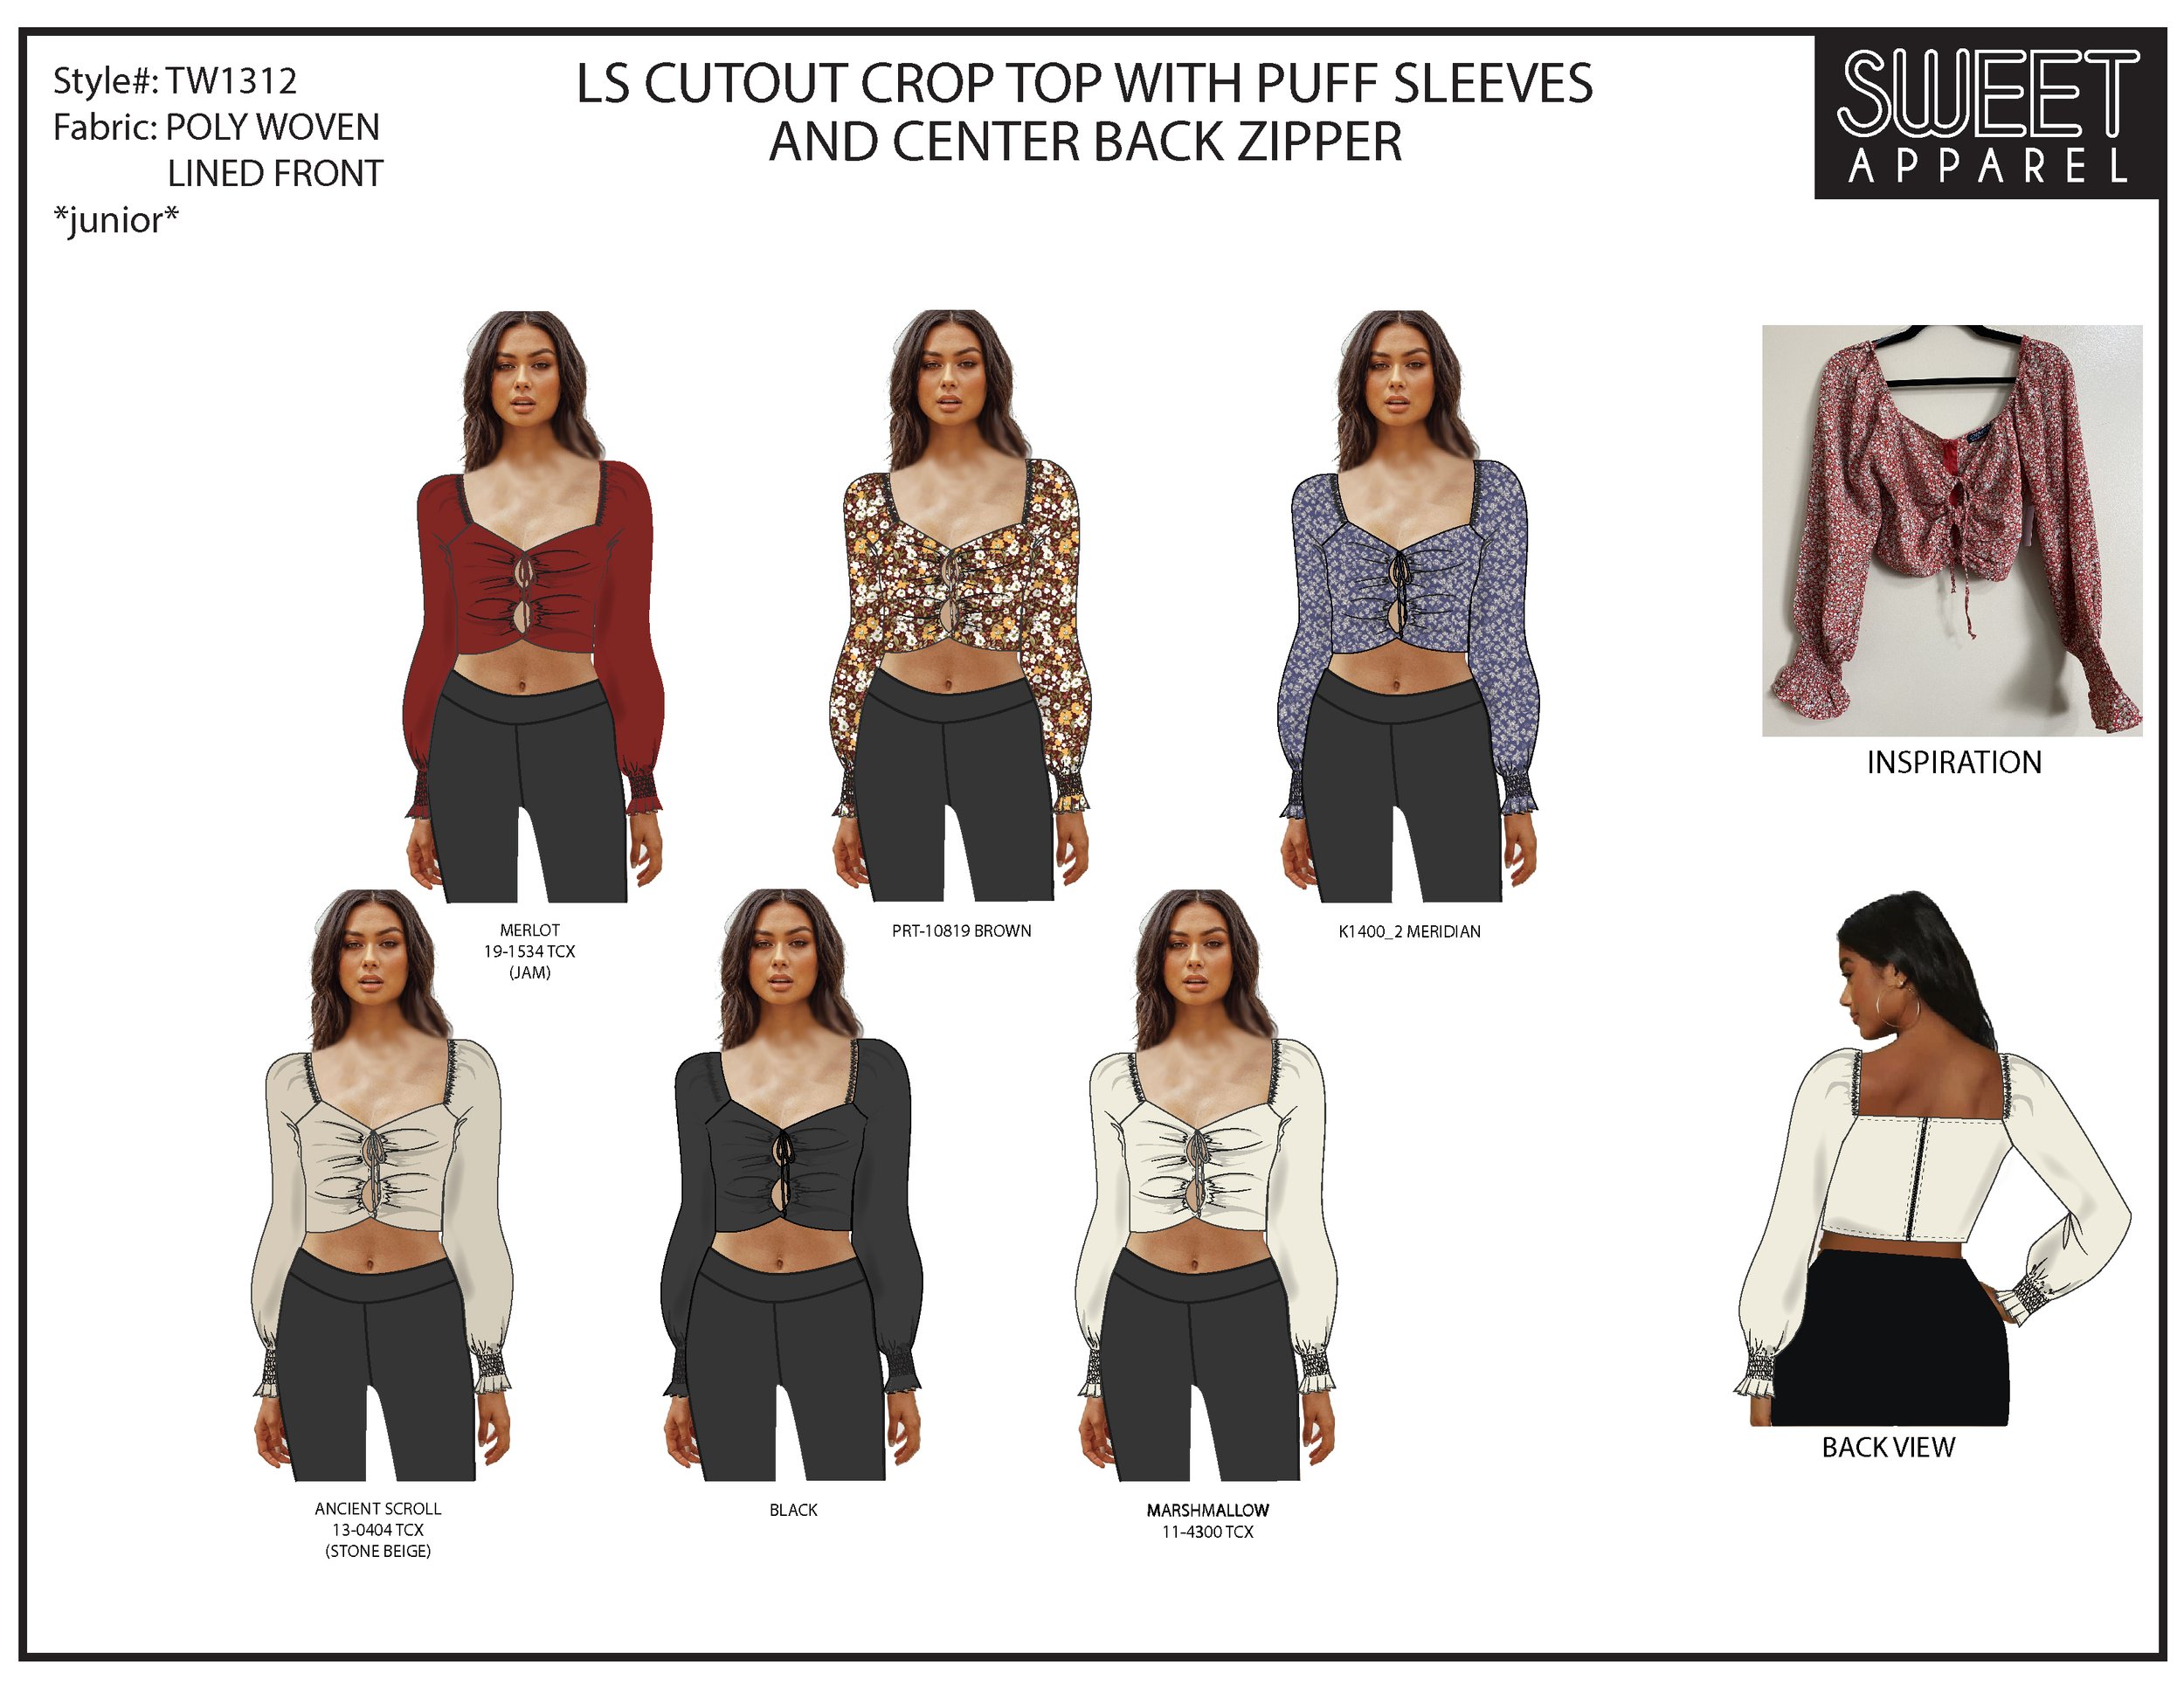 TW1312 - LS CUTOUT CROP TOP WITH PUFF SLEEVES AND CENTER BACK ZIPPER-01.jpg